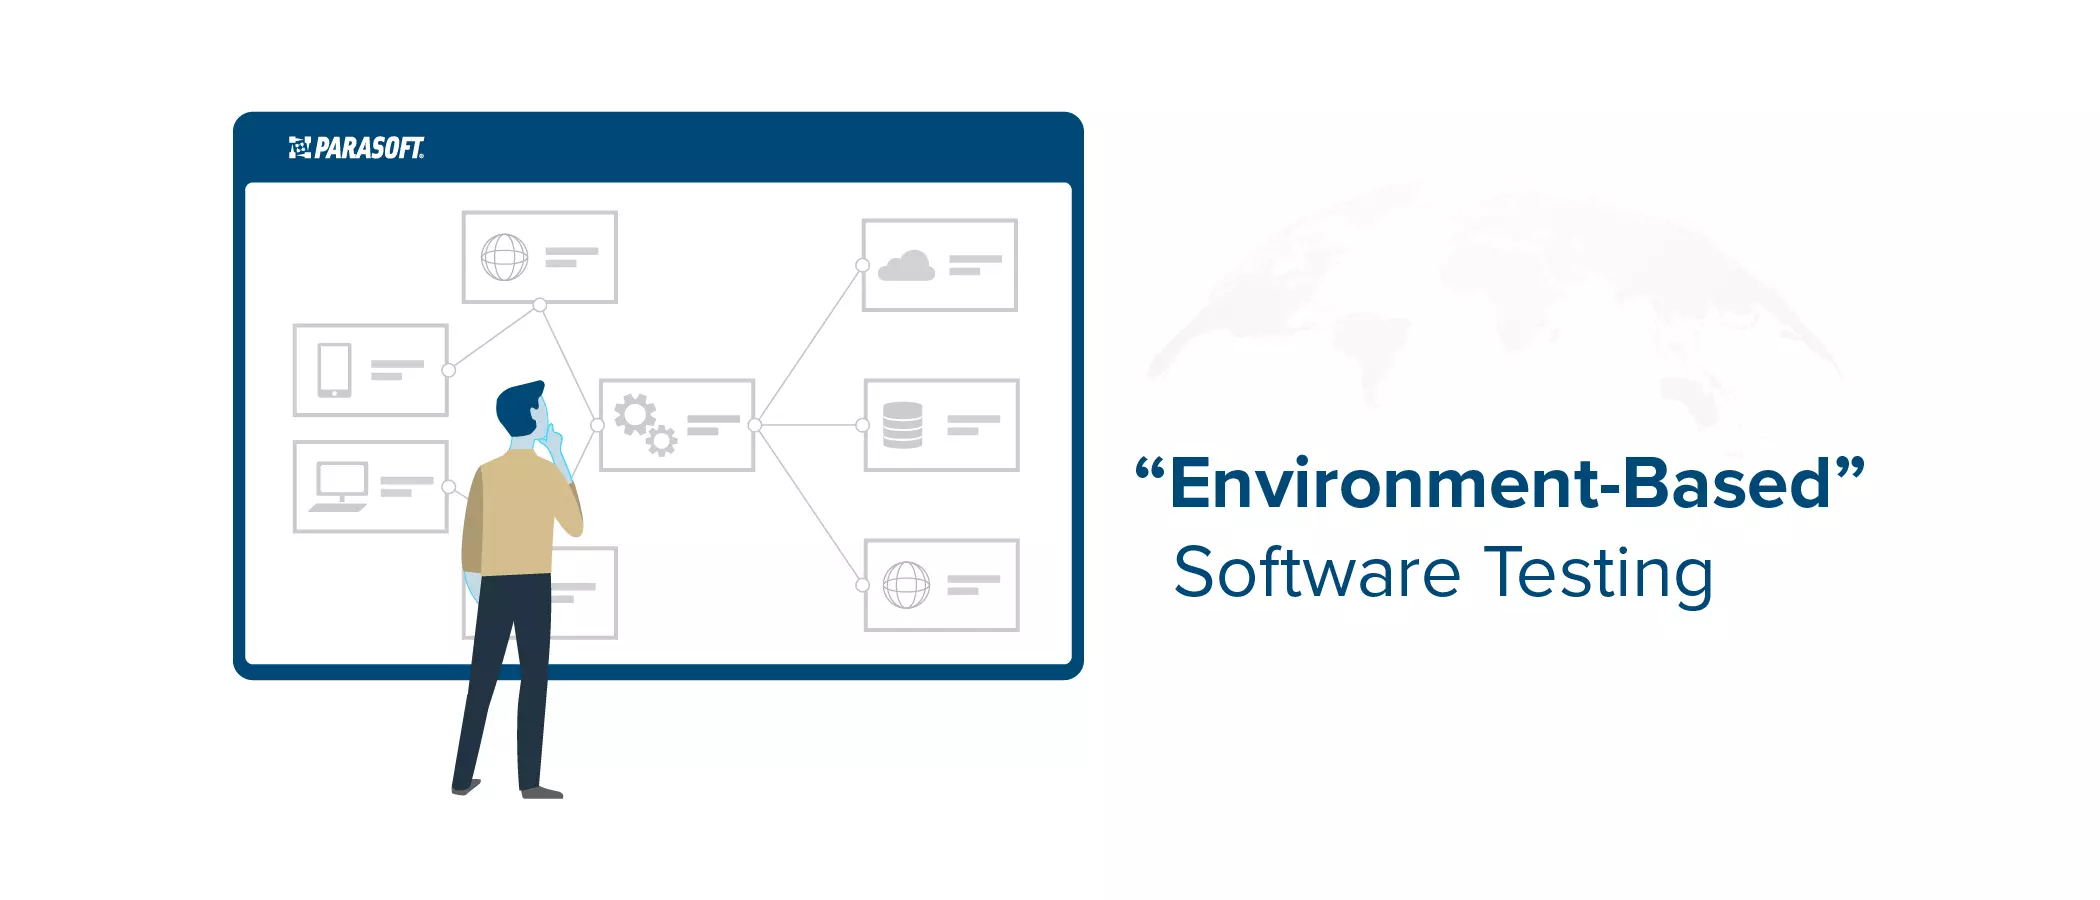 What is an ‘Environment-Based’ Approach to Software Testing?